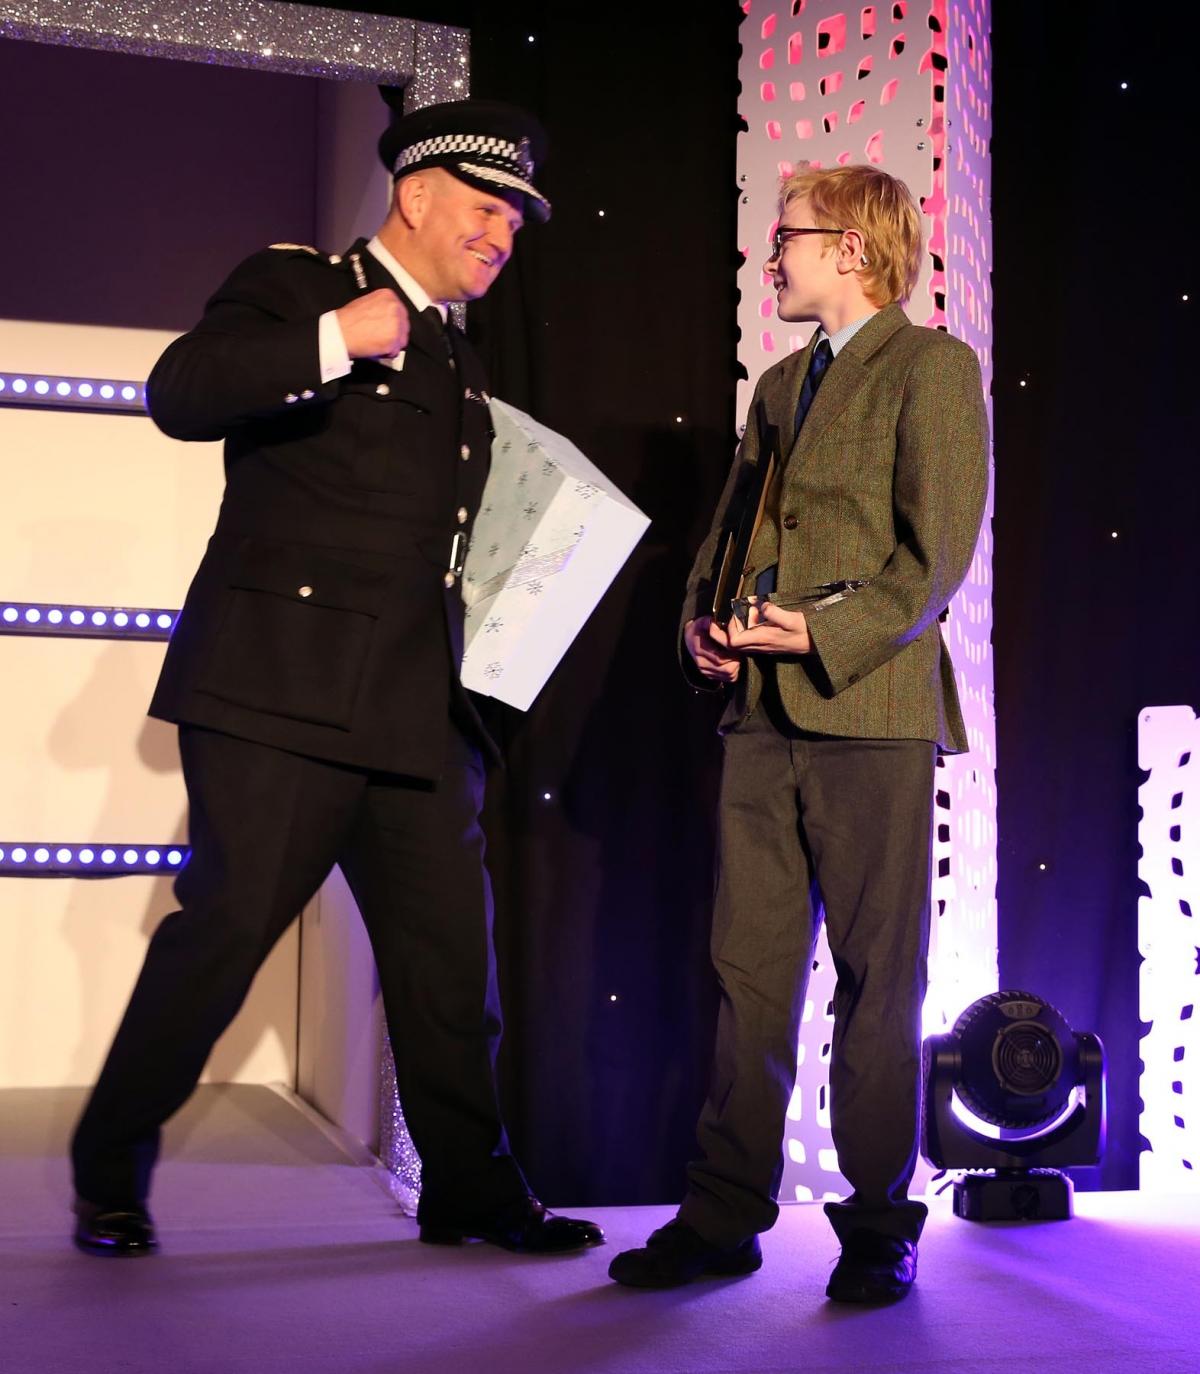 Chief Constable of Durham Constabulary, Mike Barton, presents Charlie with a signed copy of the Police Interceptors 2017 calendar after the 11-year-old expressed dreams of becoming a police officer. Picture: CHRIS BOOTH